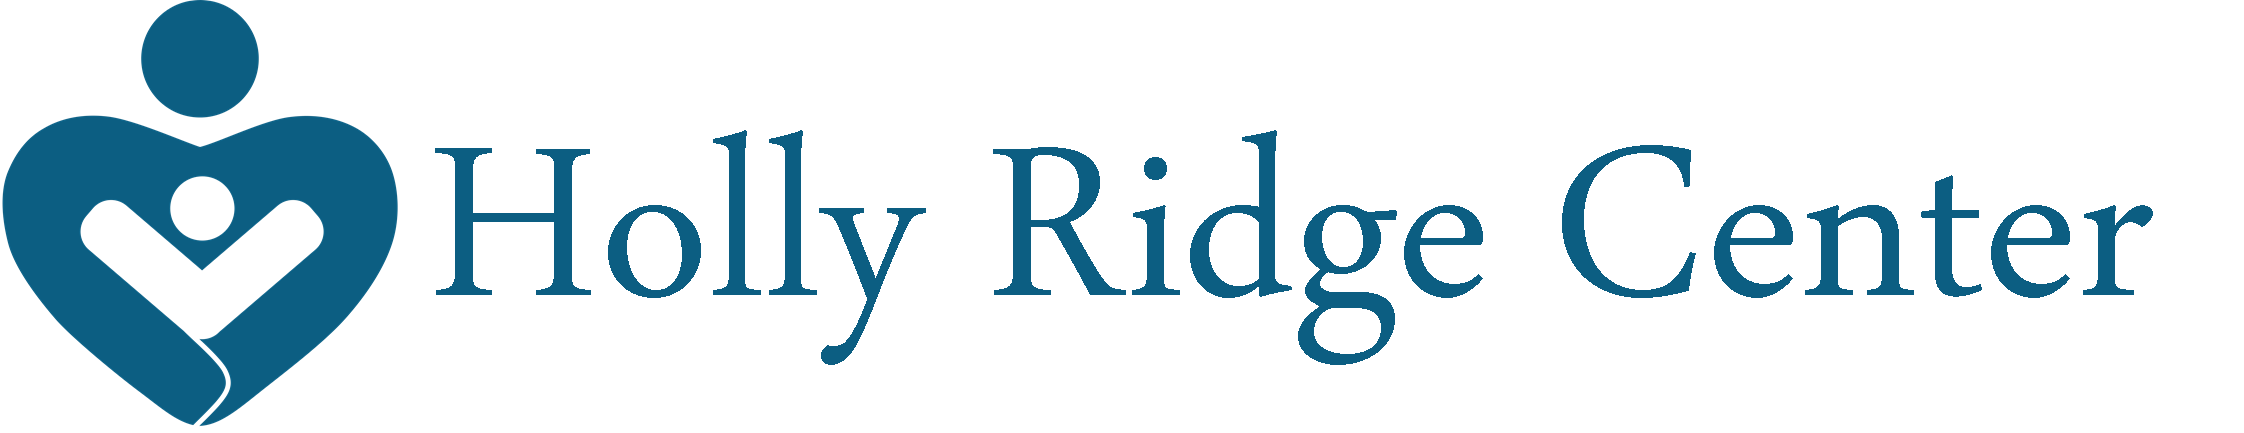 Holly Ridge Center Logo: All text that reads: "Holly Ridge Center" with a dark blue, heart-shaped person holding a smaller, white person in their arms.